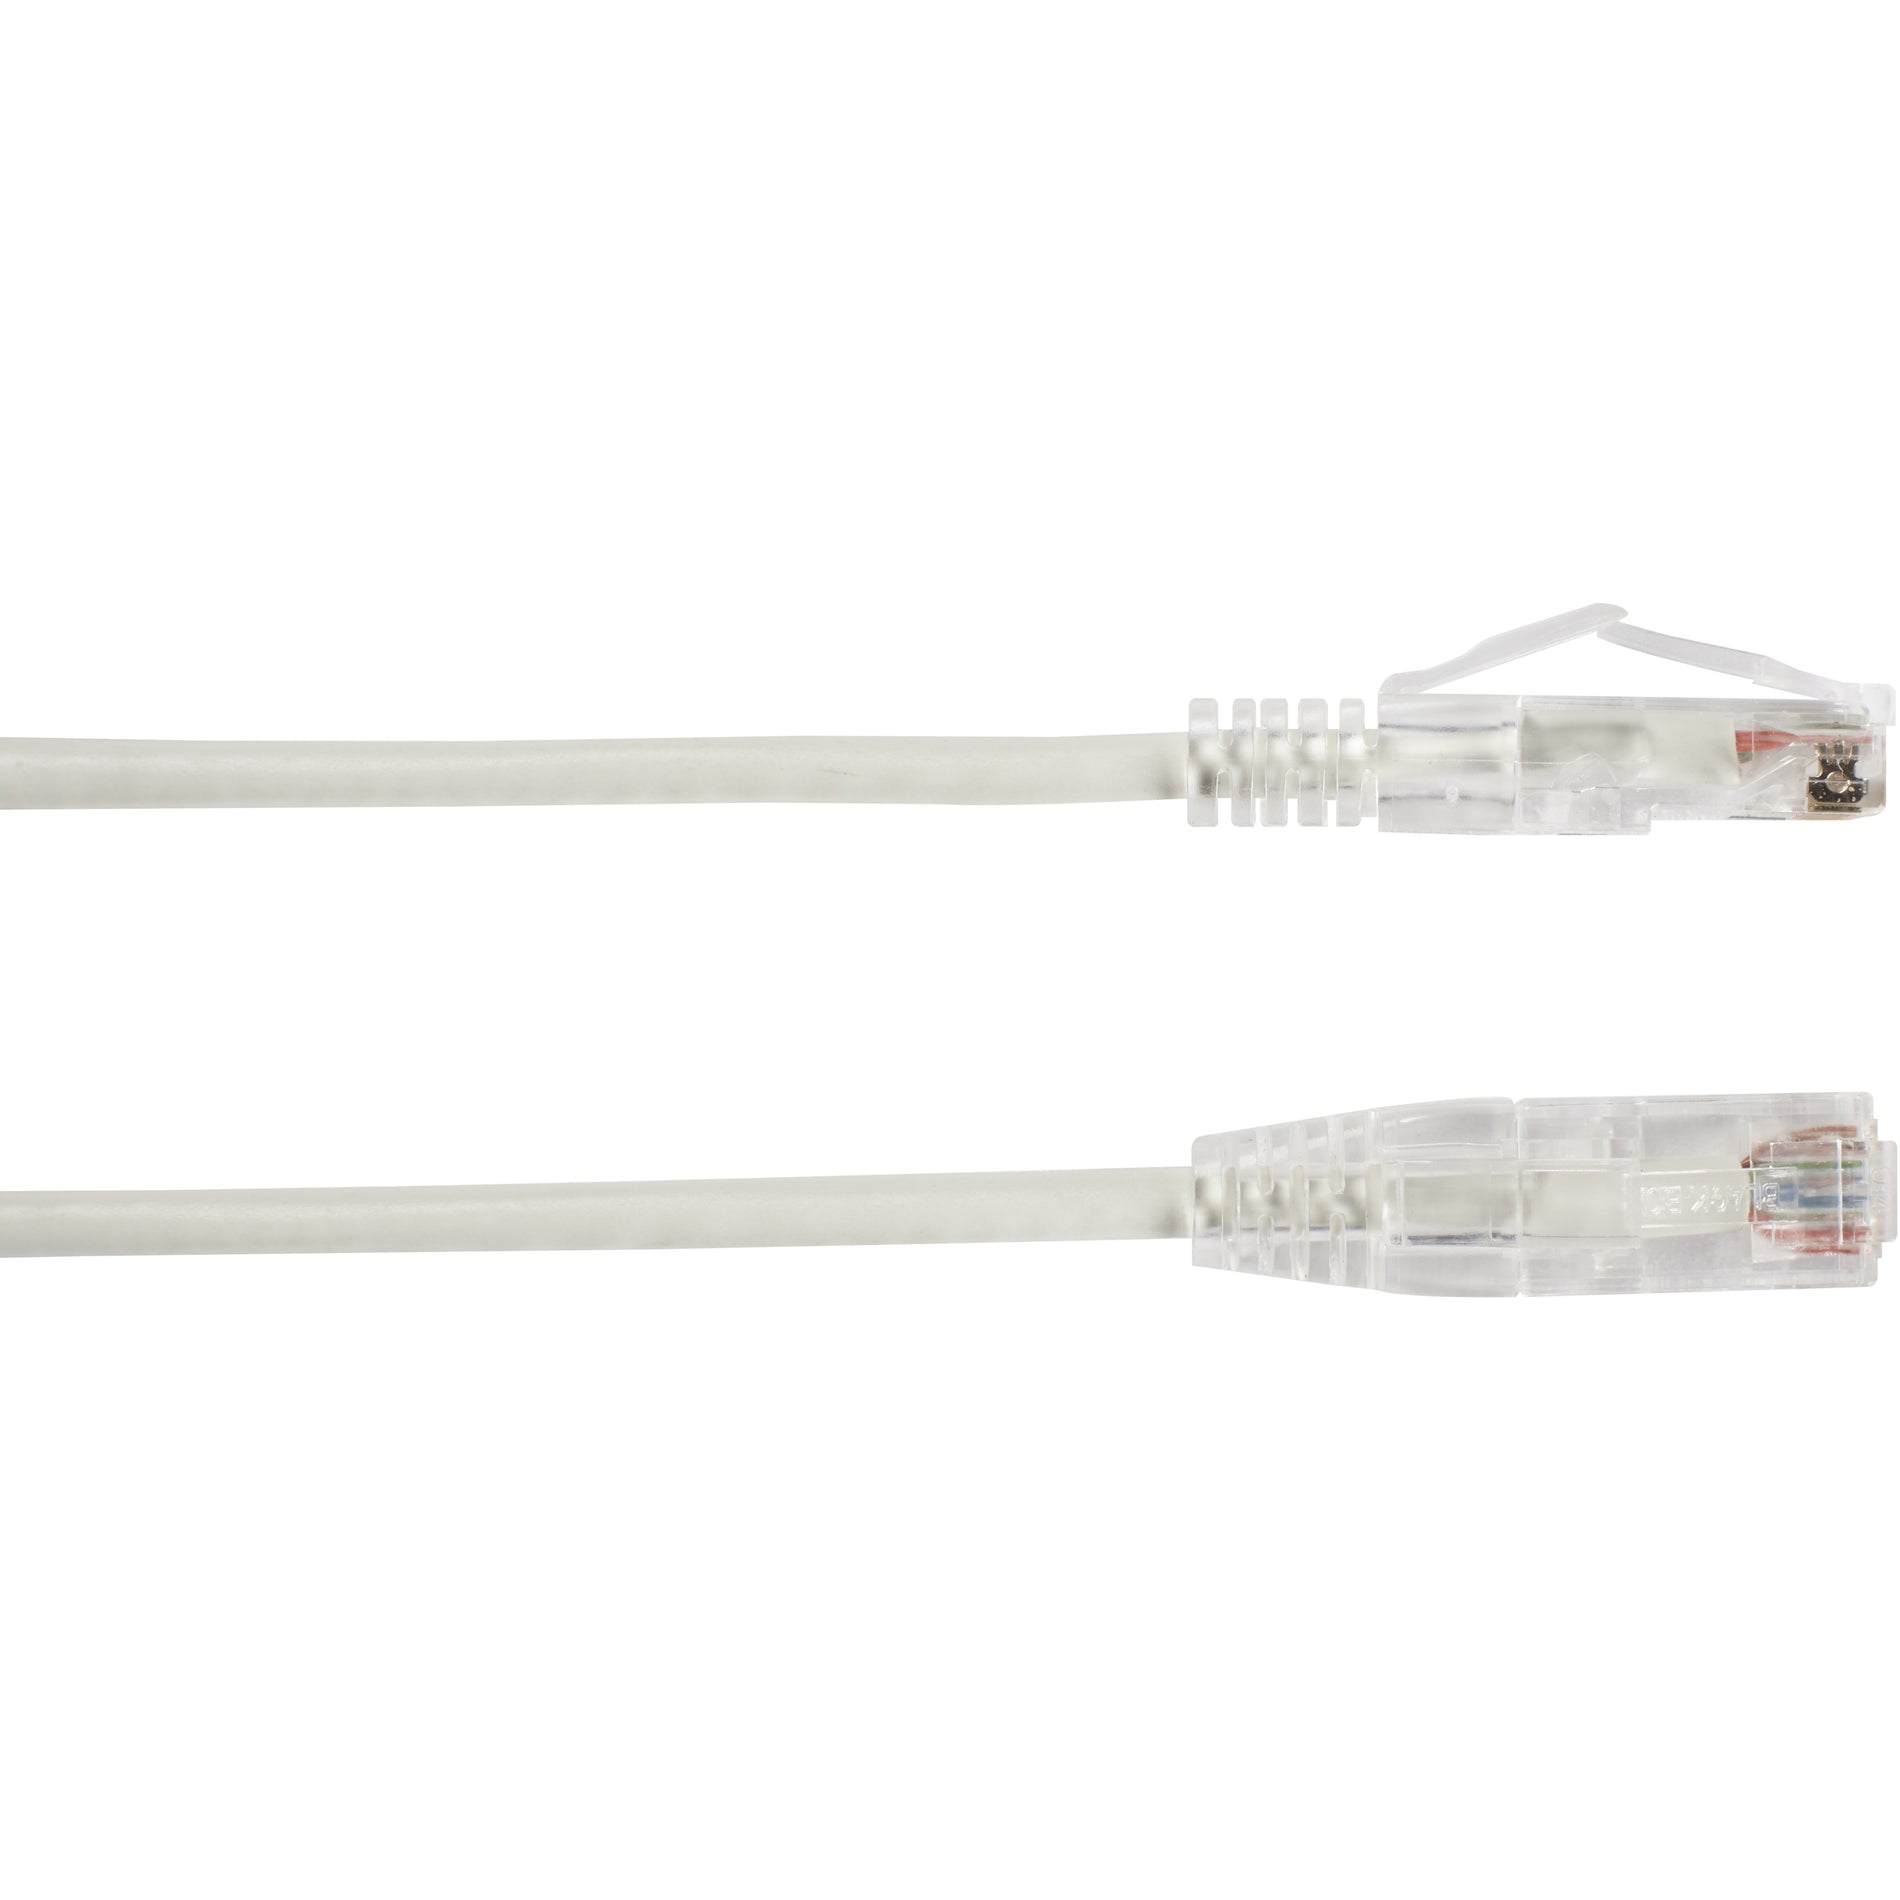 Black Box C6APC28-WH-05 Slim-Net Cat.6a UTP Patch Network Cable, 5 ft, Snagless Boot, 10 Gbit/s Data Transfer Rate